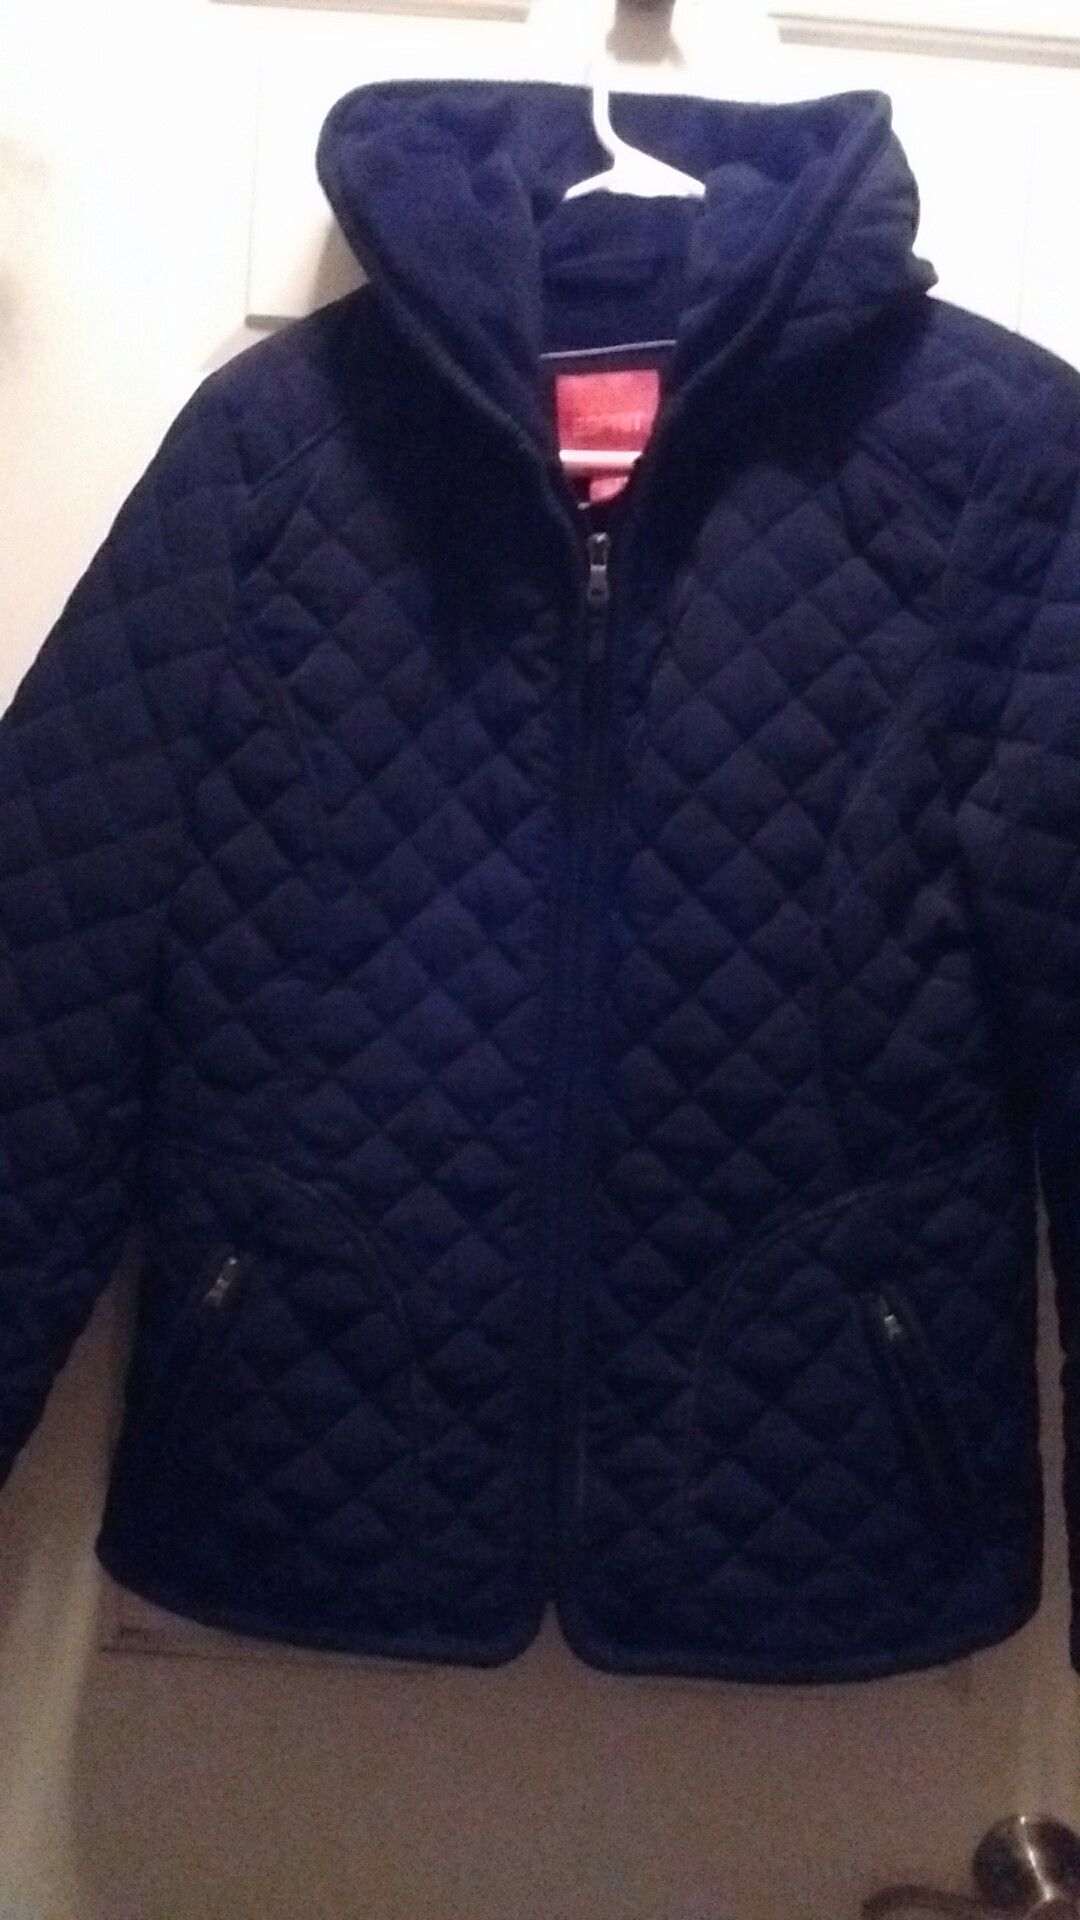 Nice quilted jacket size large